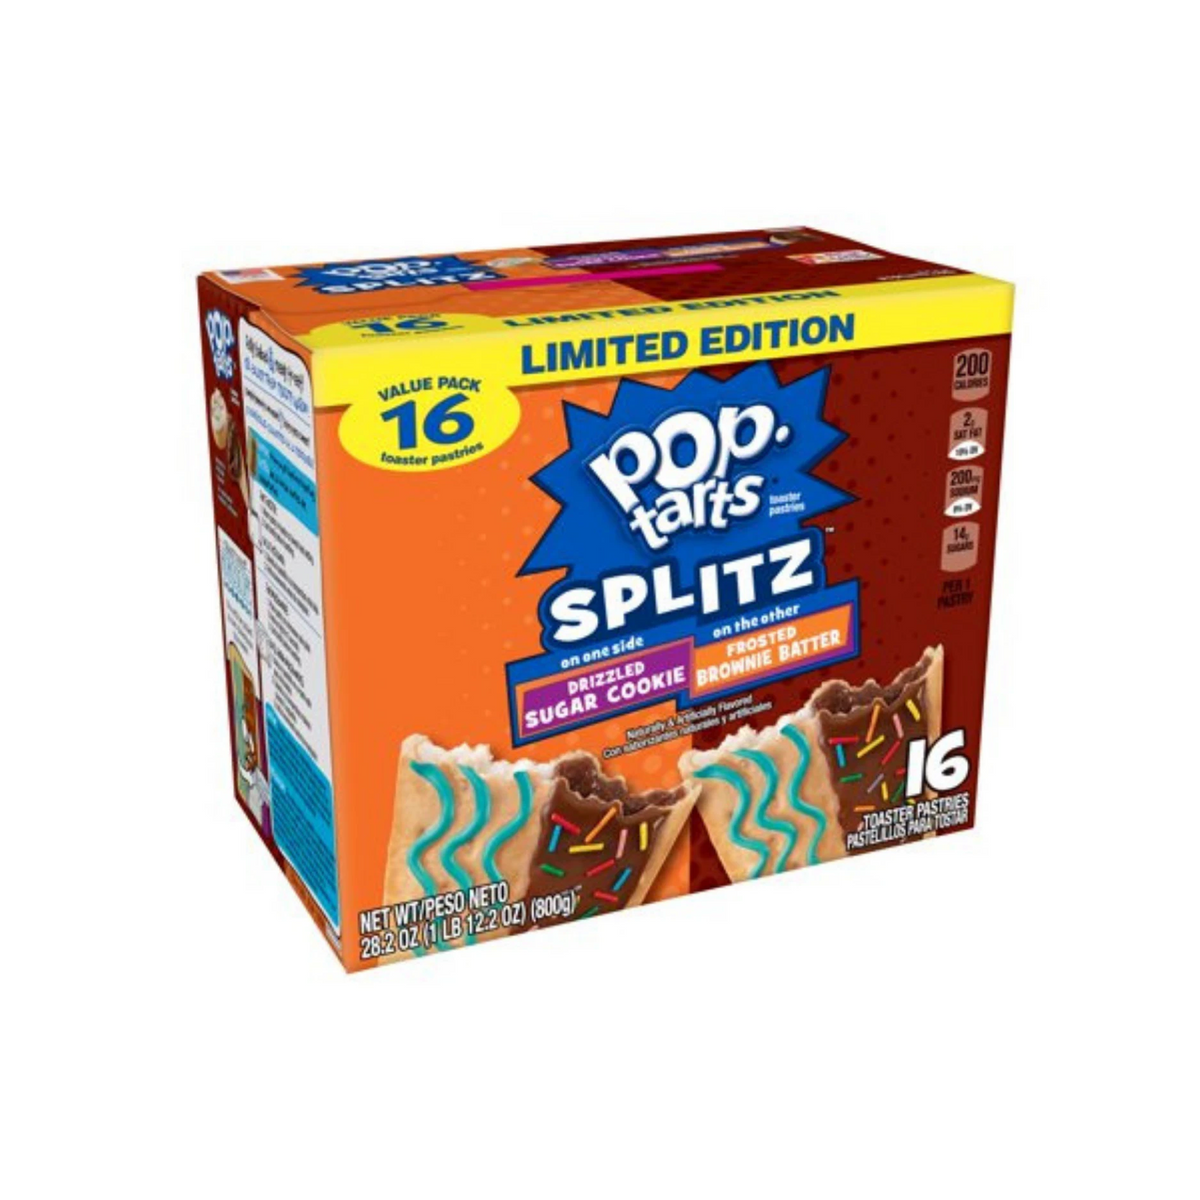 Pop-Tarts Splitz Drizzled Sugar Cookie-Frosted Brownie Batter